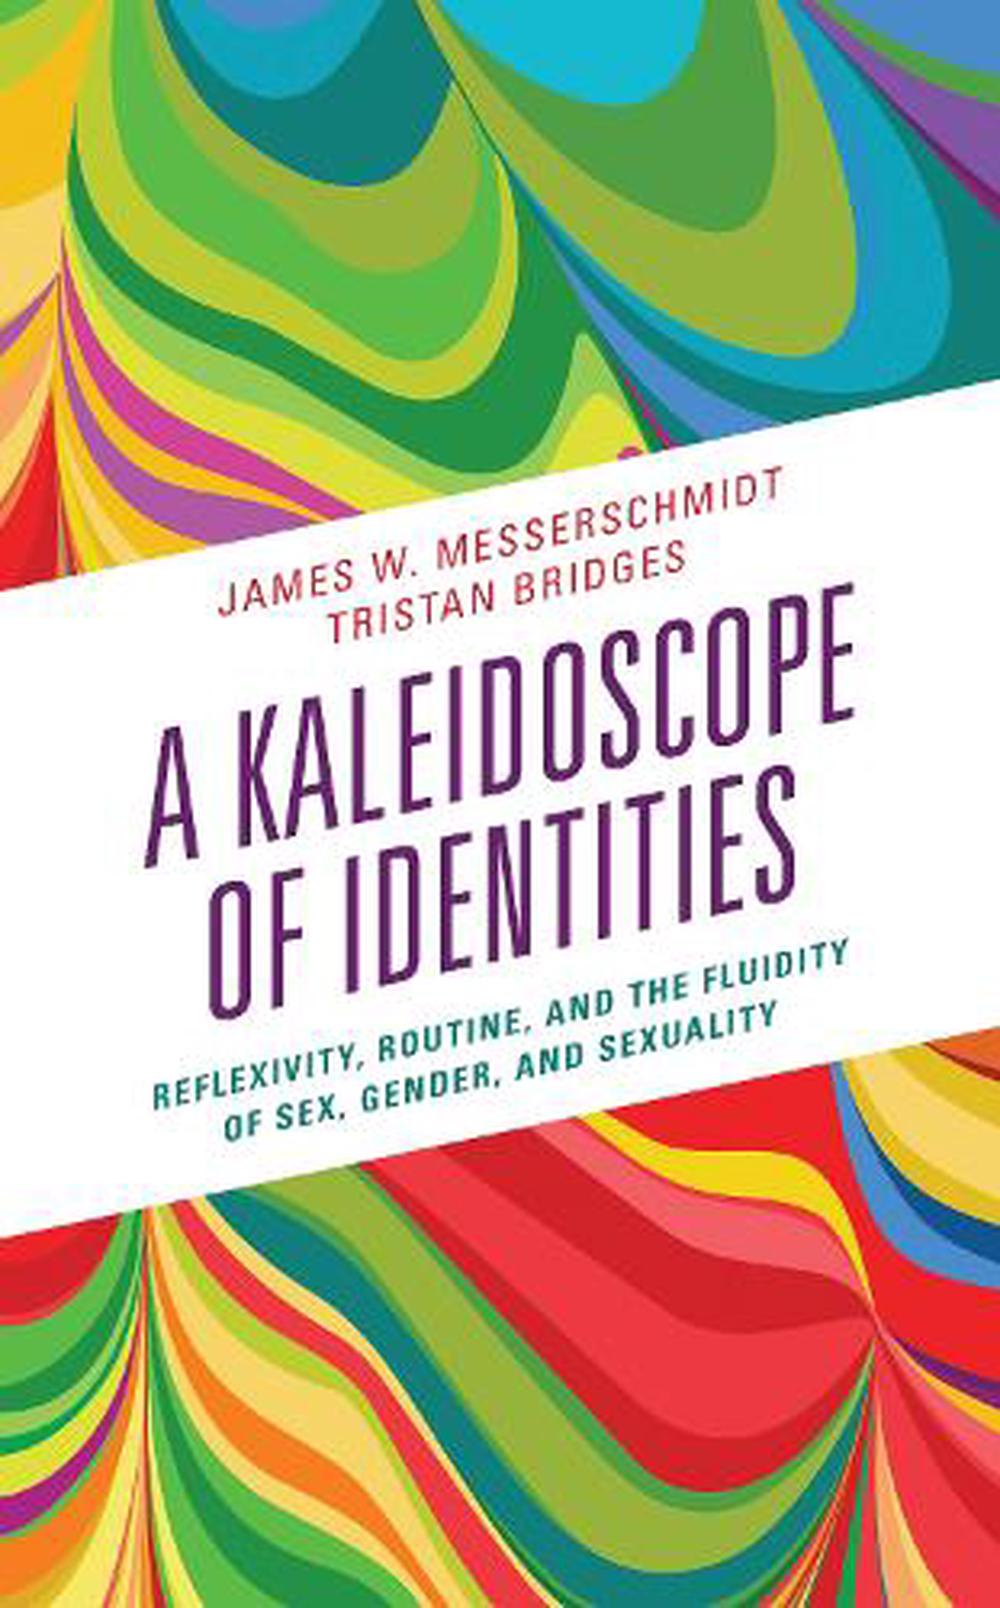 A Kaleidoscope Of Identities Reflexivity Routine And The Fluidity Of